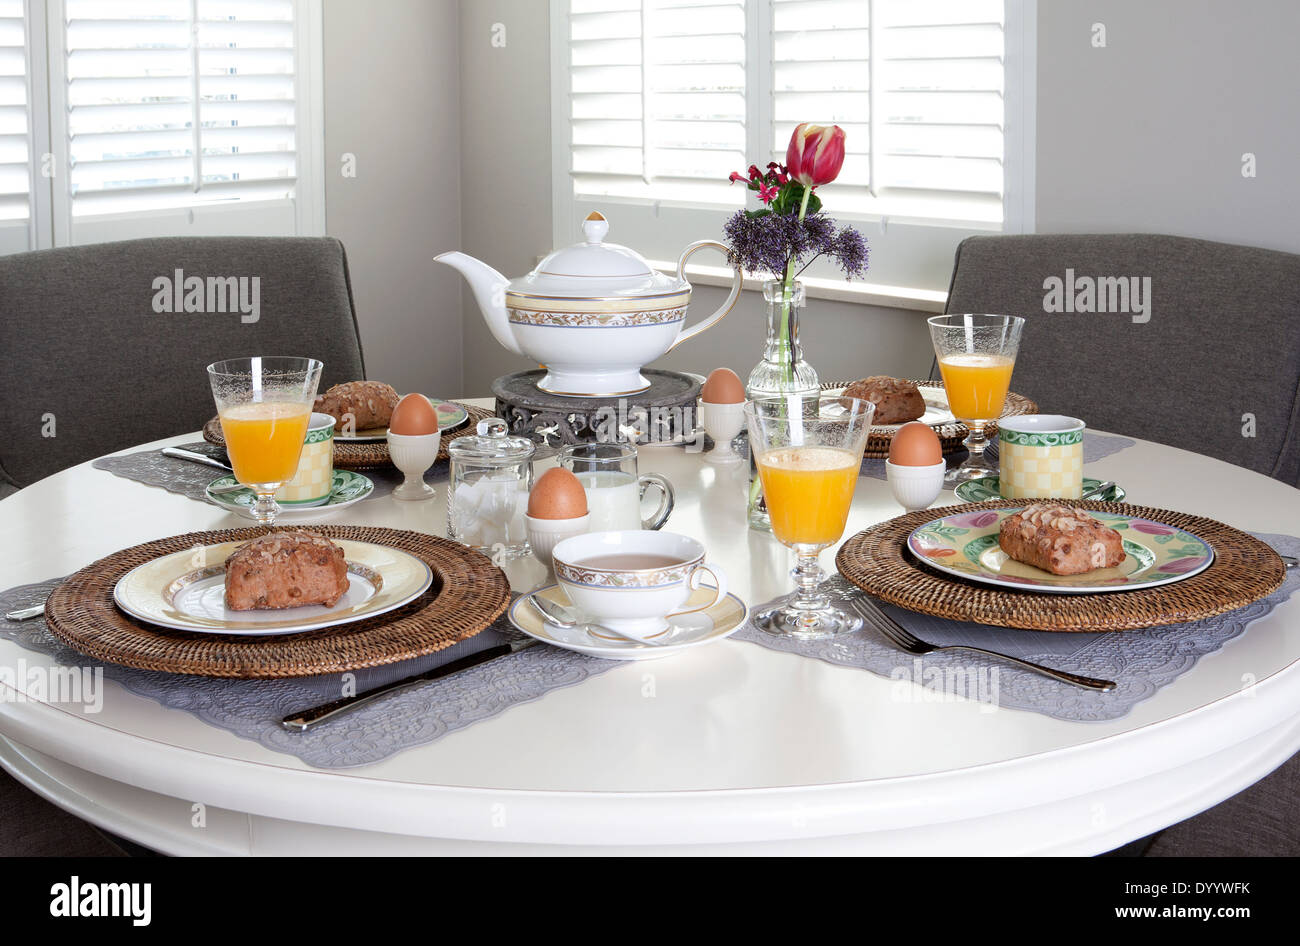 Continental Breakfast Table Setting With Tea In A Cup High Resolution